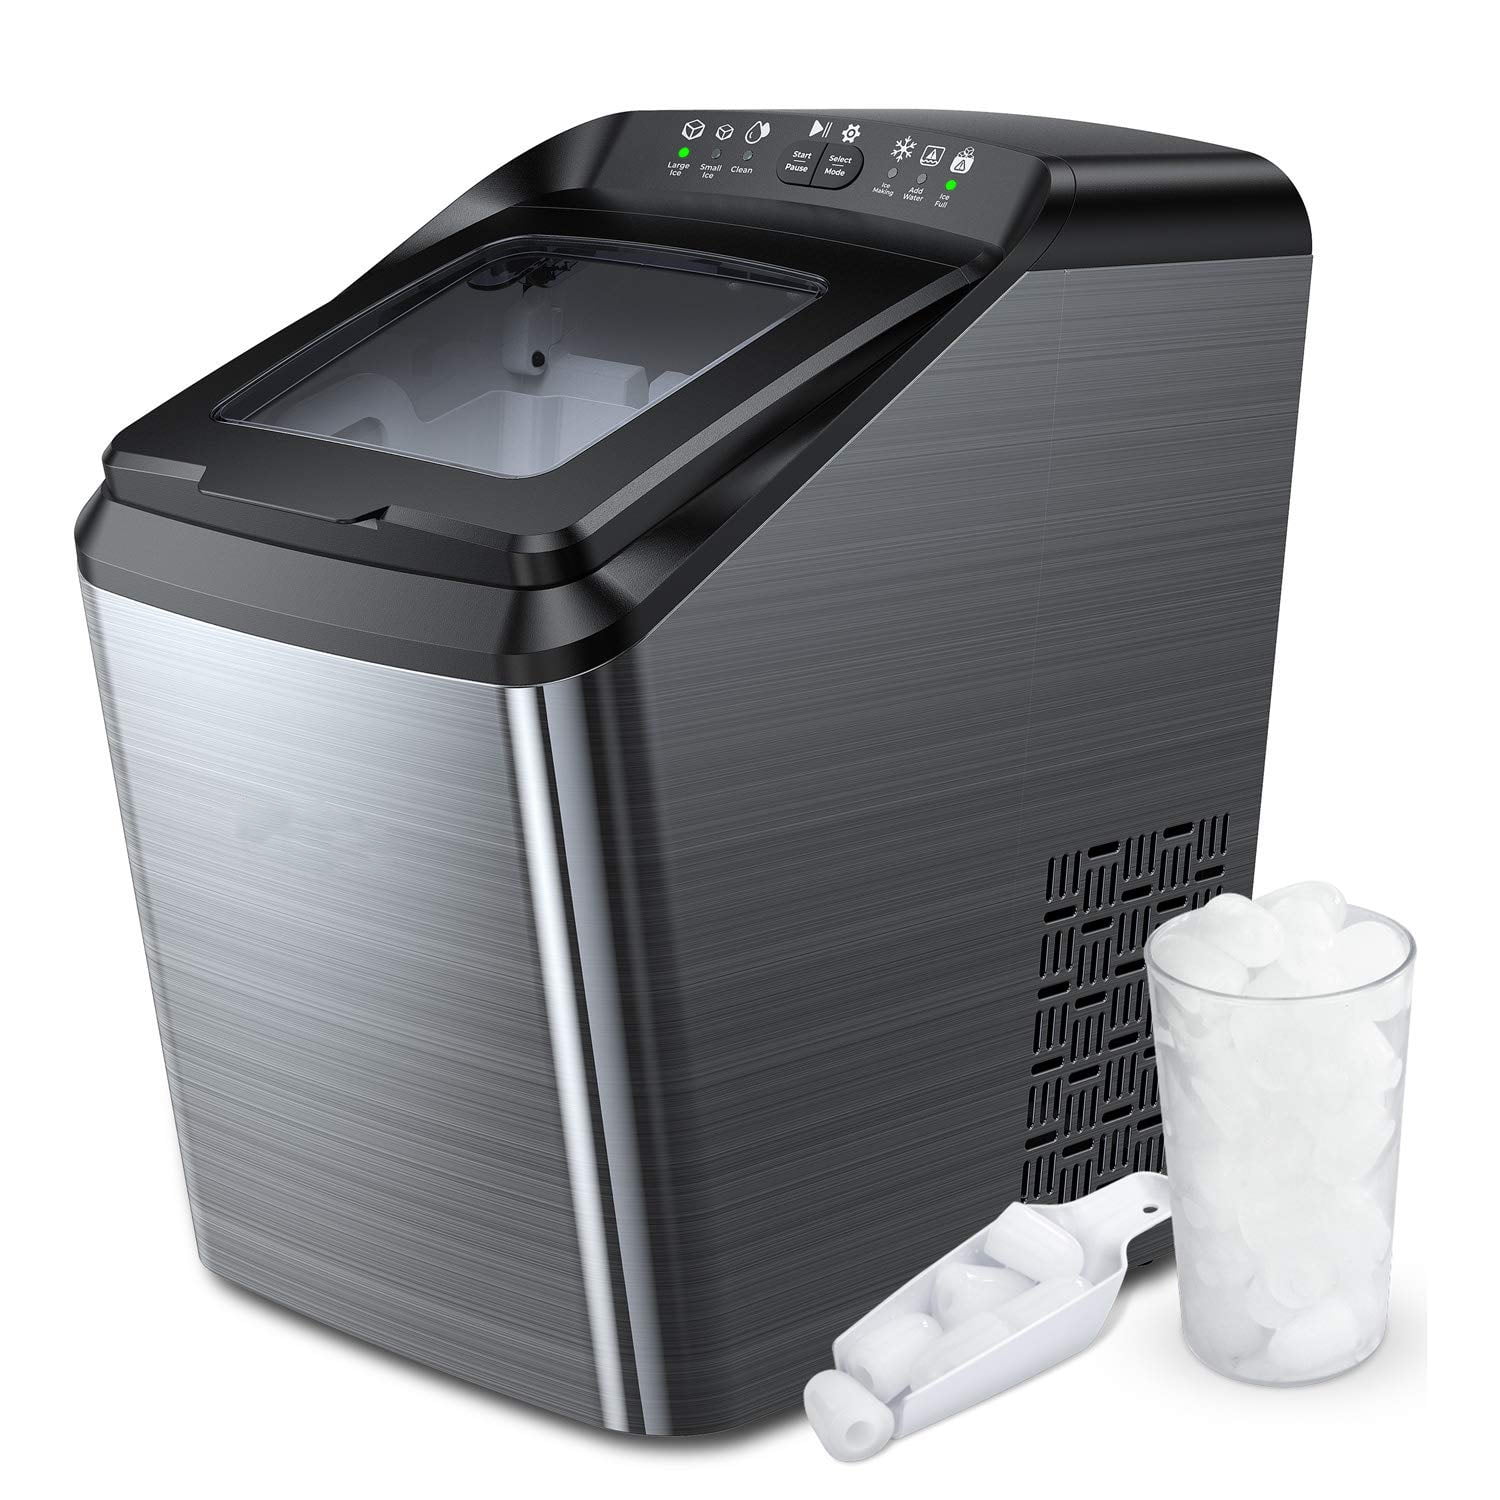 Ice Maker Machine for Countertop Ice Cubes Ready in 8 Mins Compact&Lightweight Ice Maker with Ice Scoop/Basket/Stainless Steel Makes 35 lbs Ice in 24 hrs LCD display 